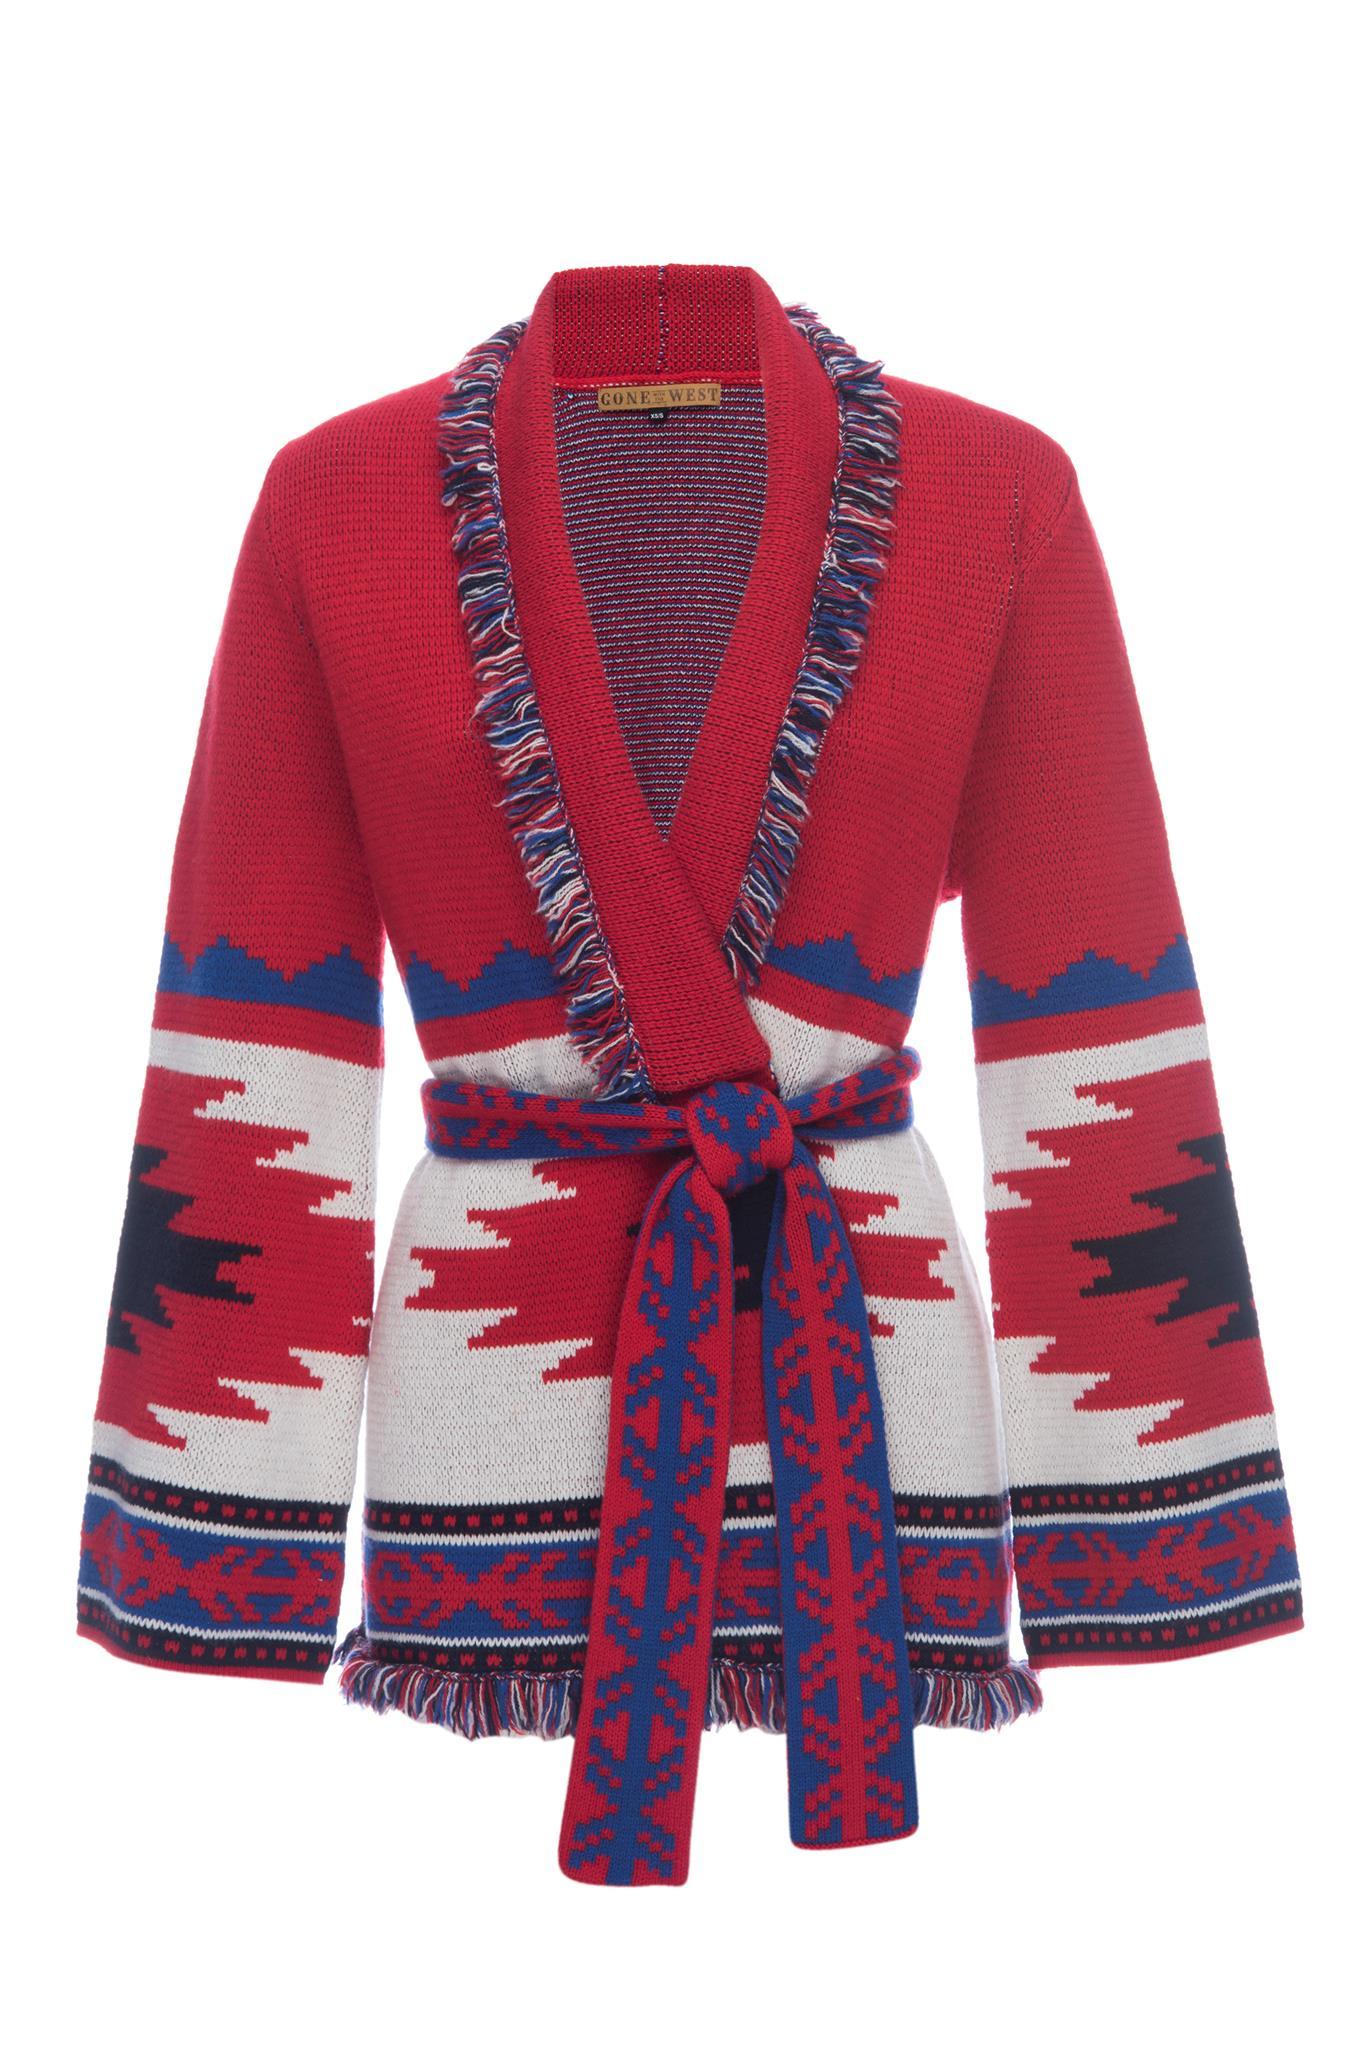 Gone With The West Aztec Cardigan Sweater